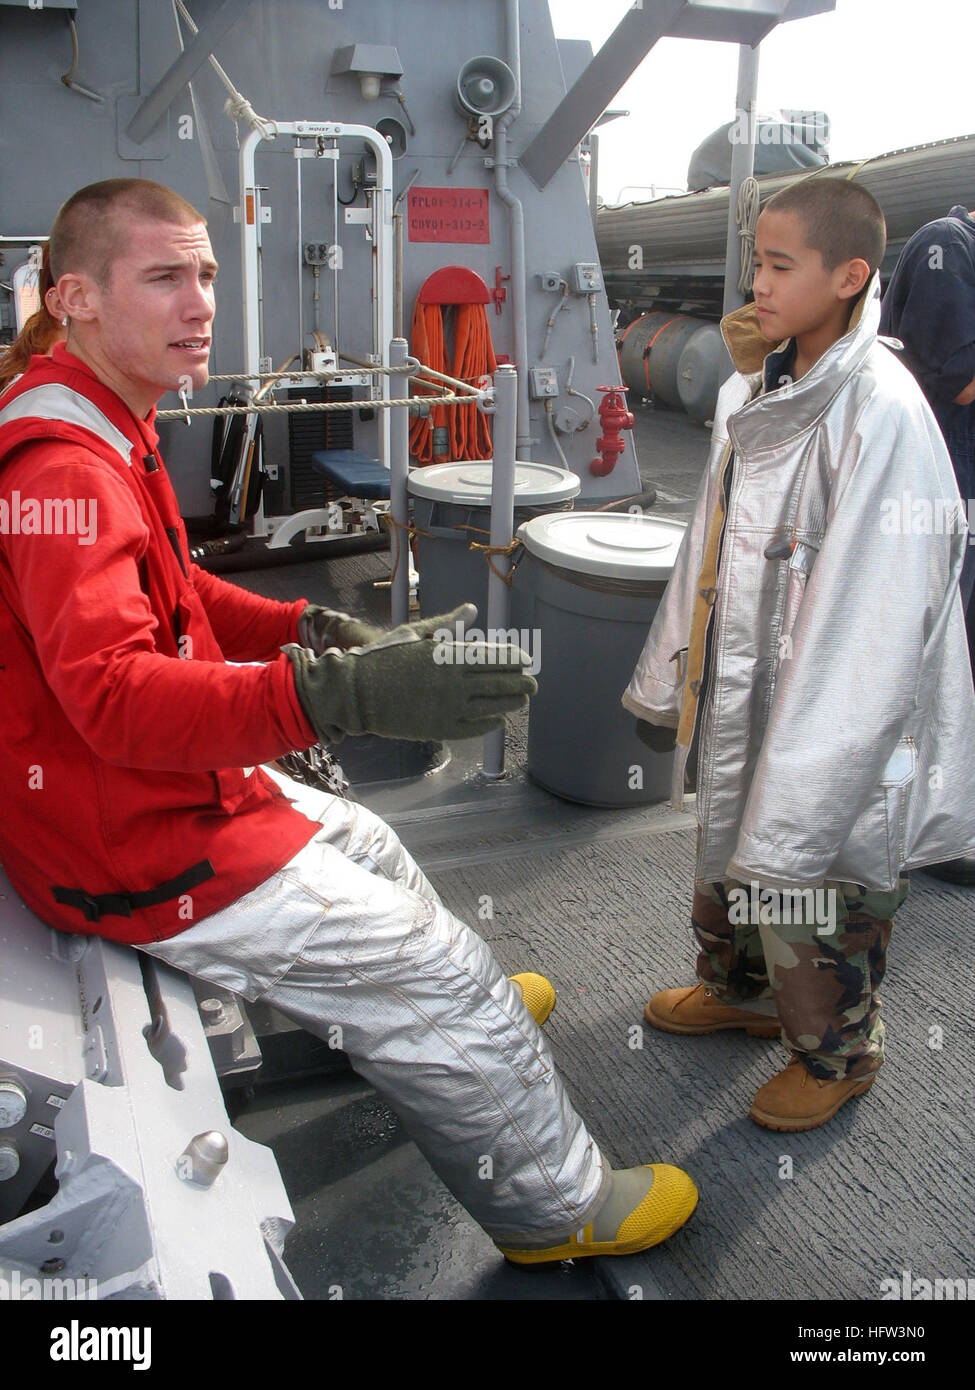 071202-N-1567S-006 PACIFIC OCEAN (Dec. 2, 2007) Damage Controlmen Fireman Derek Holder instructs a Young boy on proper aircraft firefighting procedures during the guided-missile destroyer USS Russell's (DDG 59) friends and family cruise. The ship invited more than 250 family members, friends, and Russell supporters for a weekend trip to Maui. U.S. Navy photo by Ensign Elizabeth Scheimer (Released) US Navy 071202-N-1567S-007 During guided-missile destroyer USS Russell (DDG 59) friends and family cruise, Damage Controlmen Fireman Derek Holder speaks to a Russell guest about proper aircraft firef Stock Photo